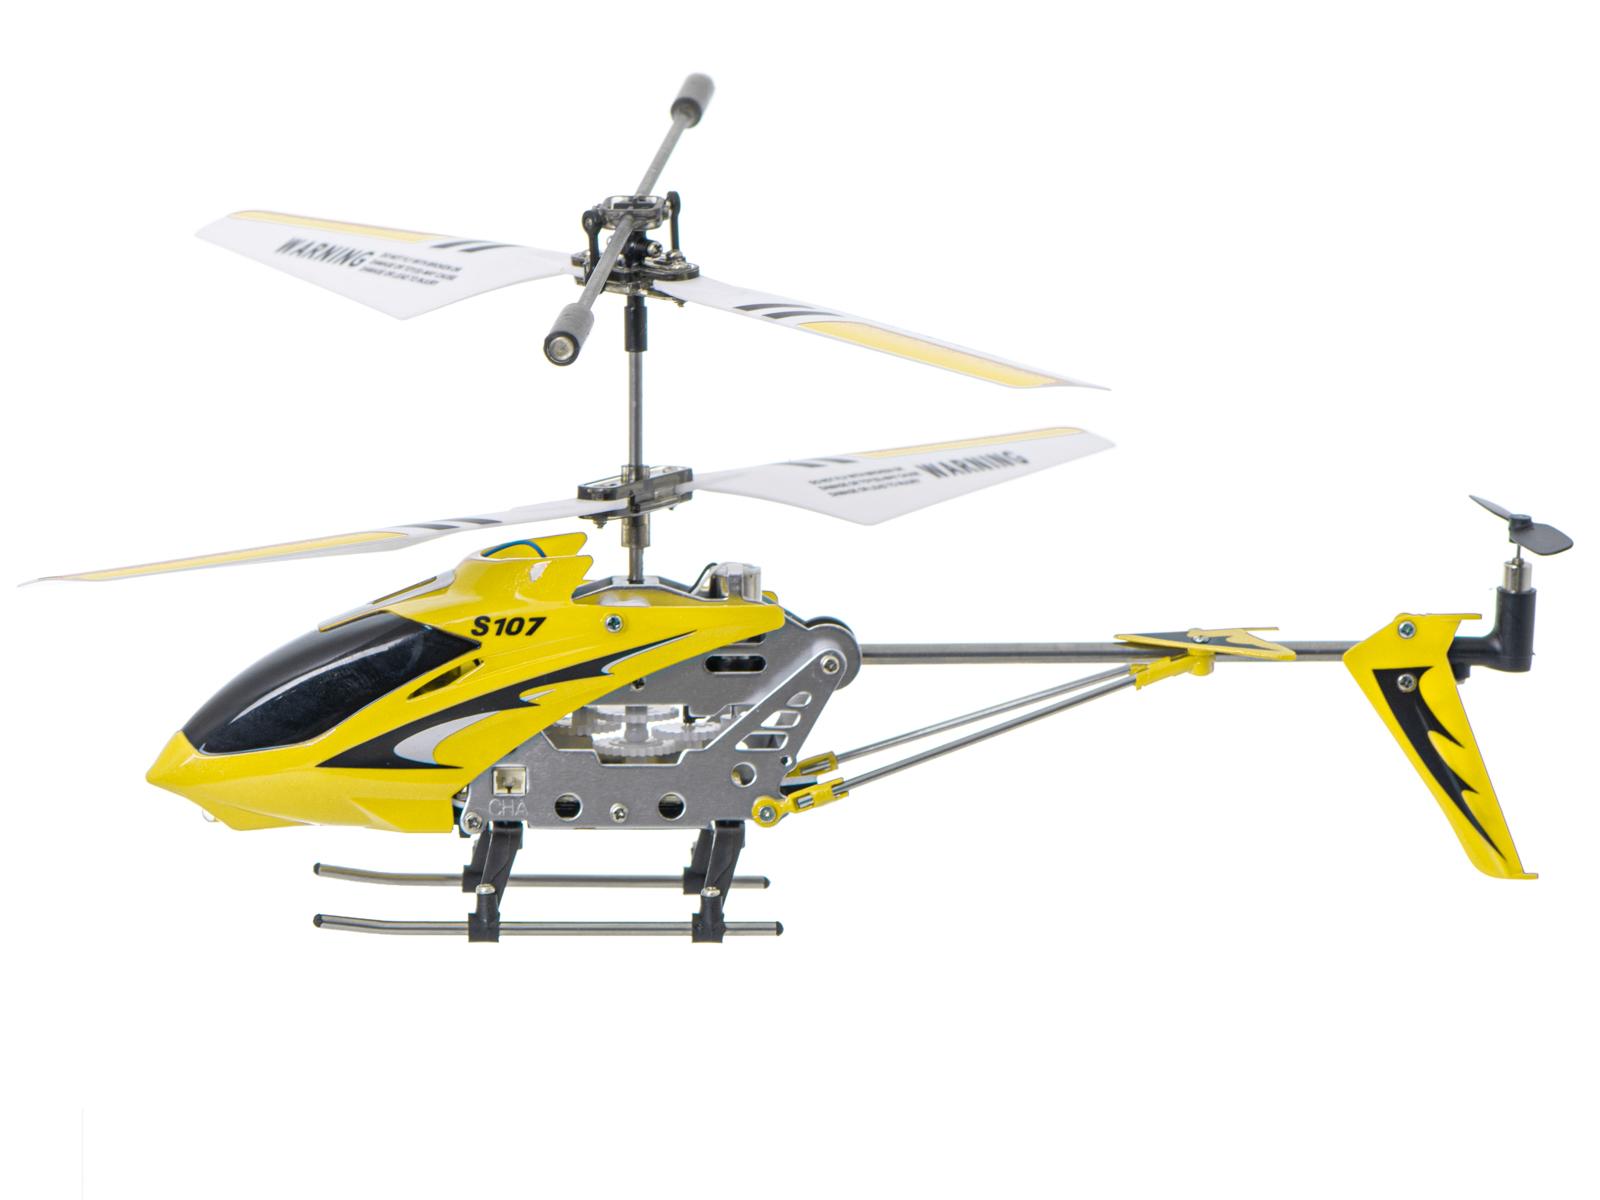 Remote Control Rc Helicopter Price: Price Range for Remote Control RC Helicopters